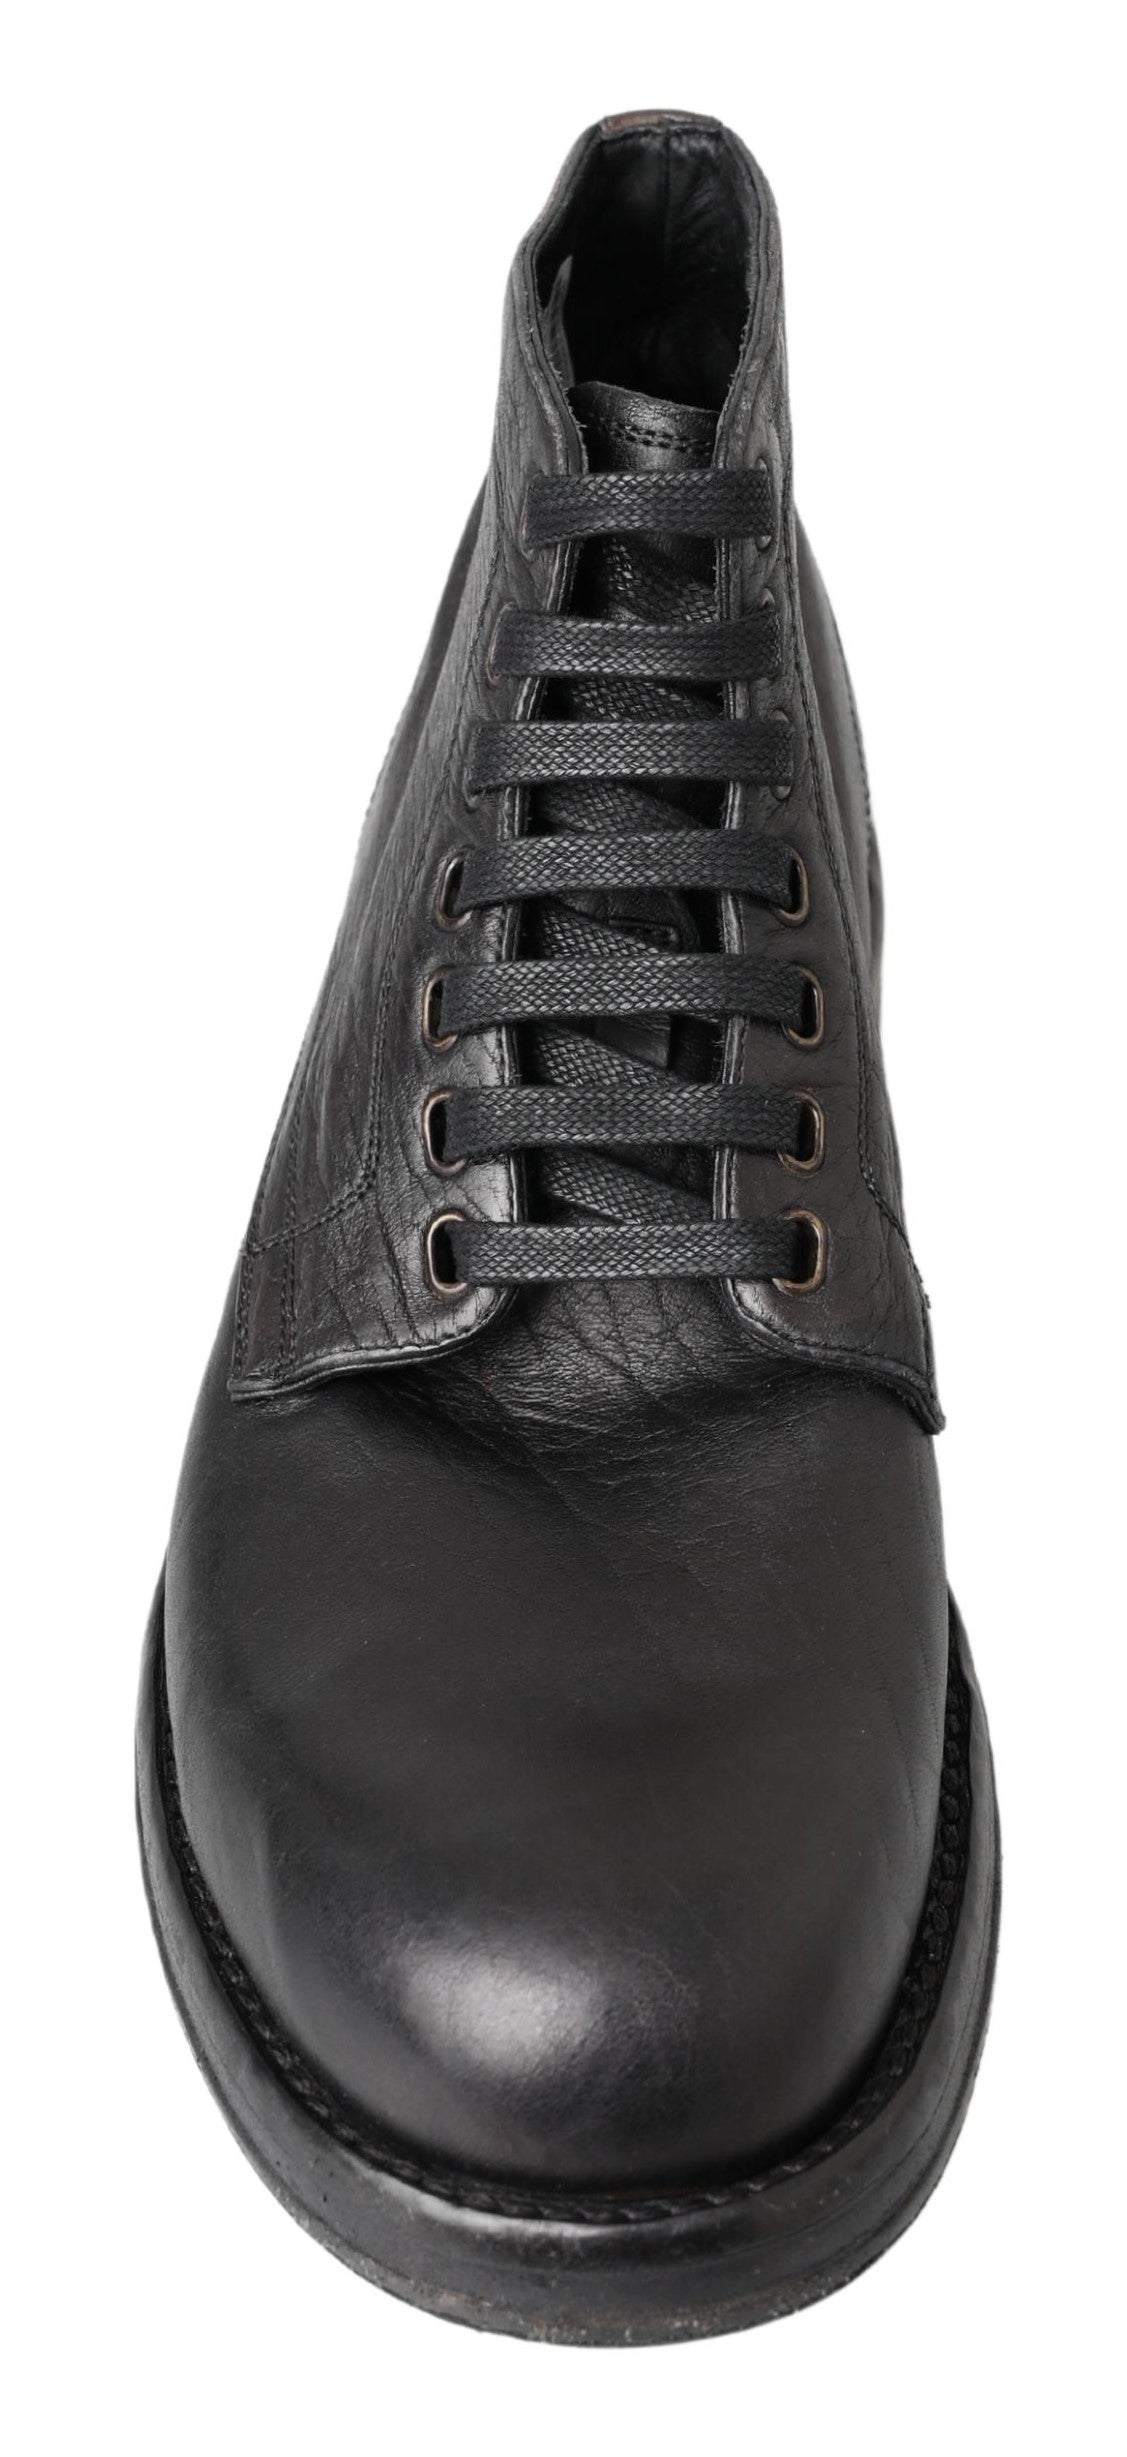 Dolce & Gabbana Equisite Black Lace-Up Leather Boots